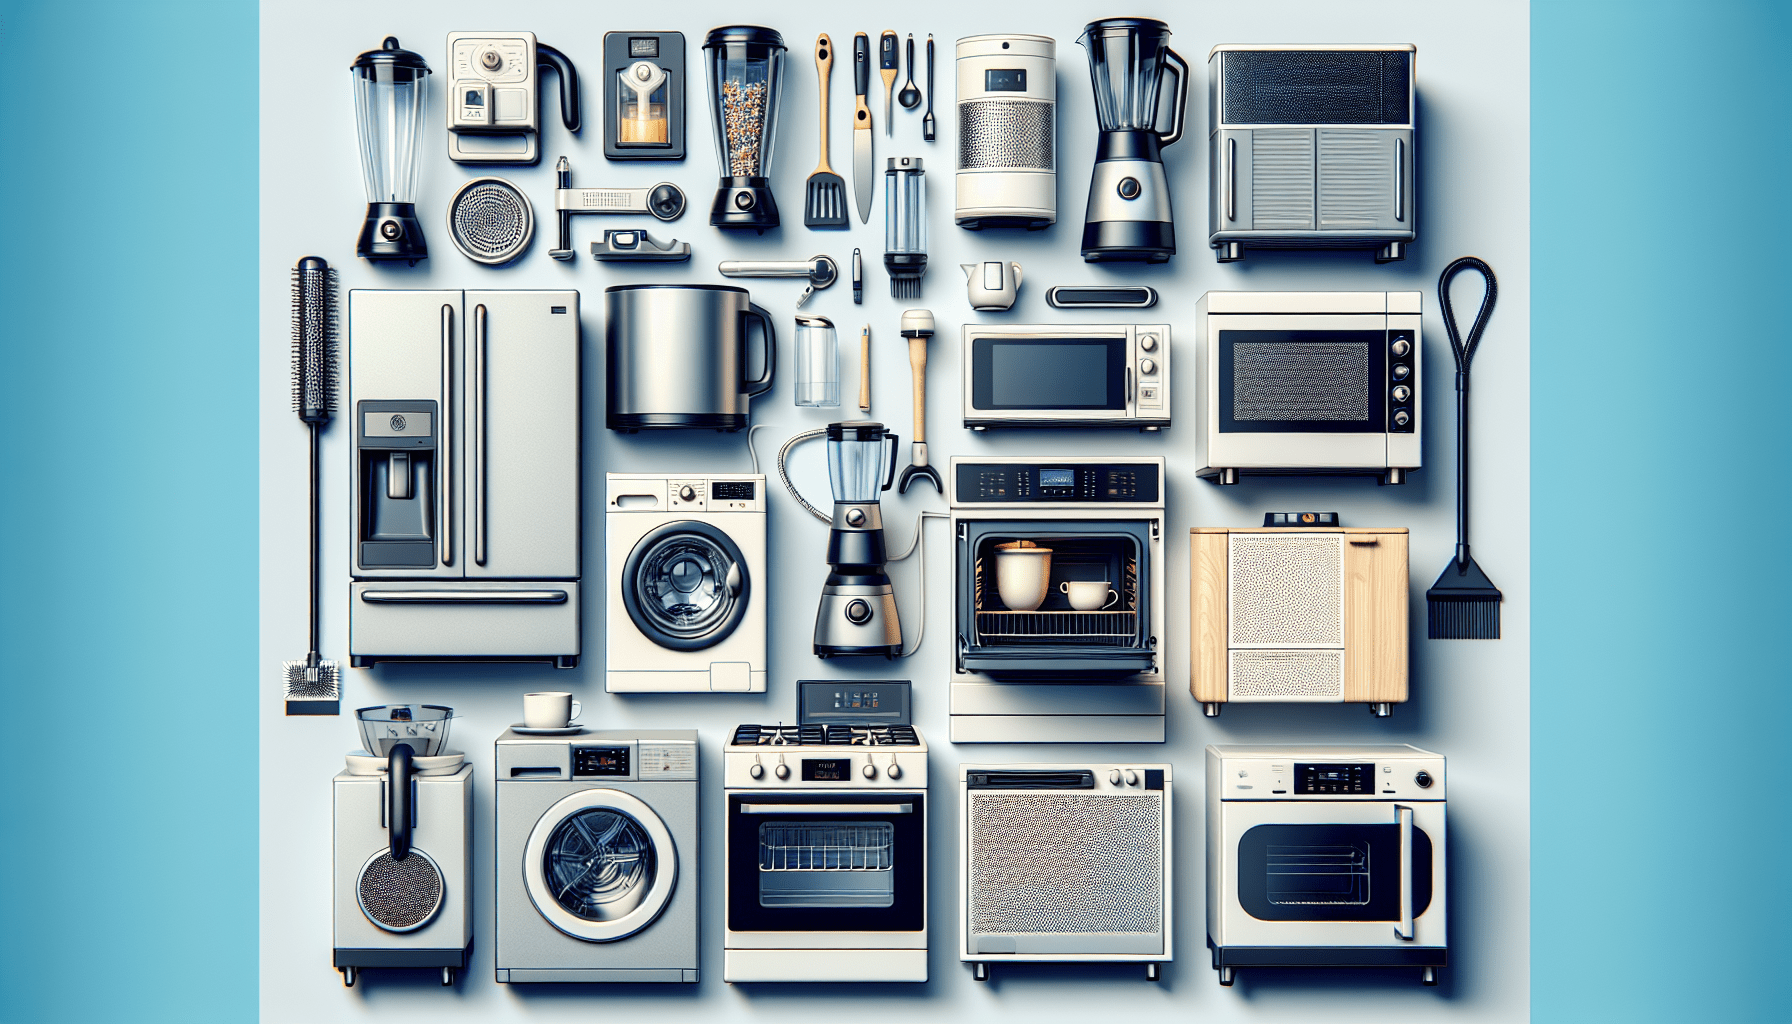 What Are The 10 Domestic Appliances?